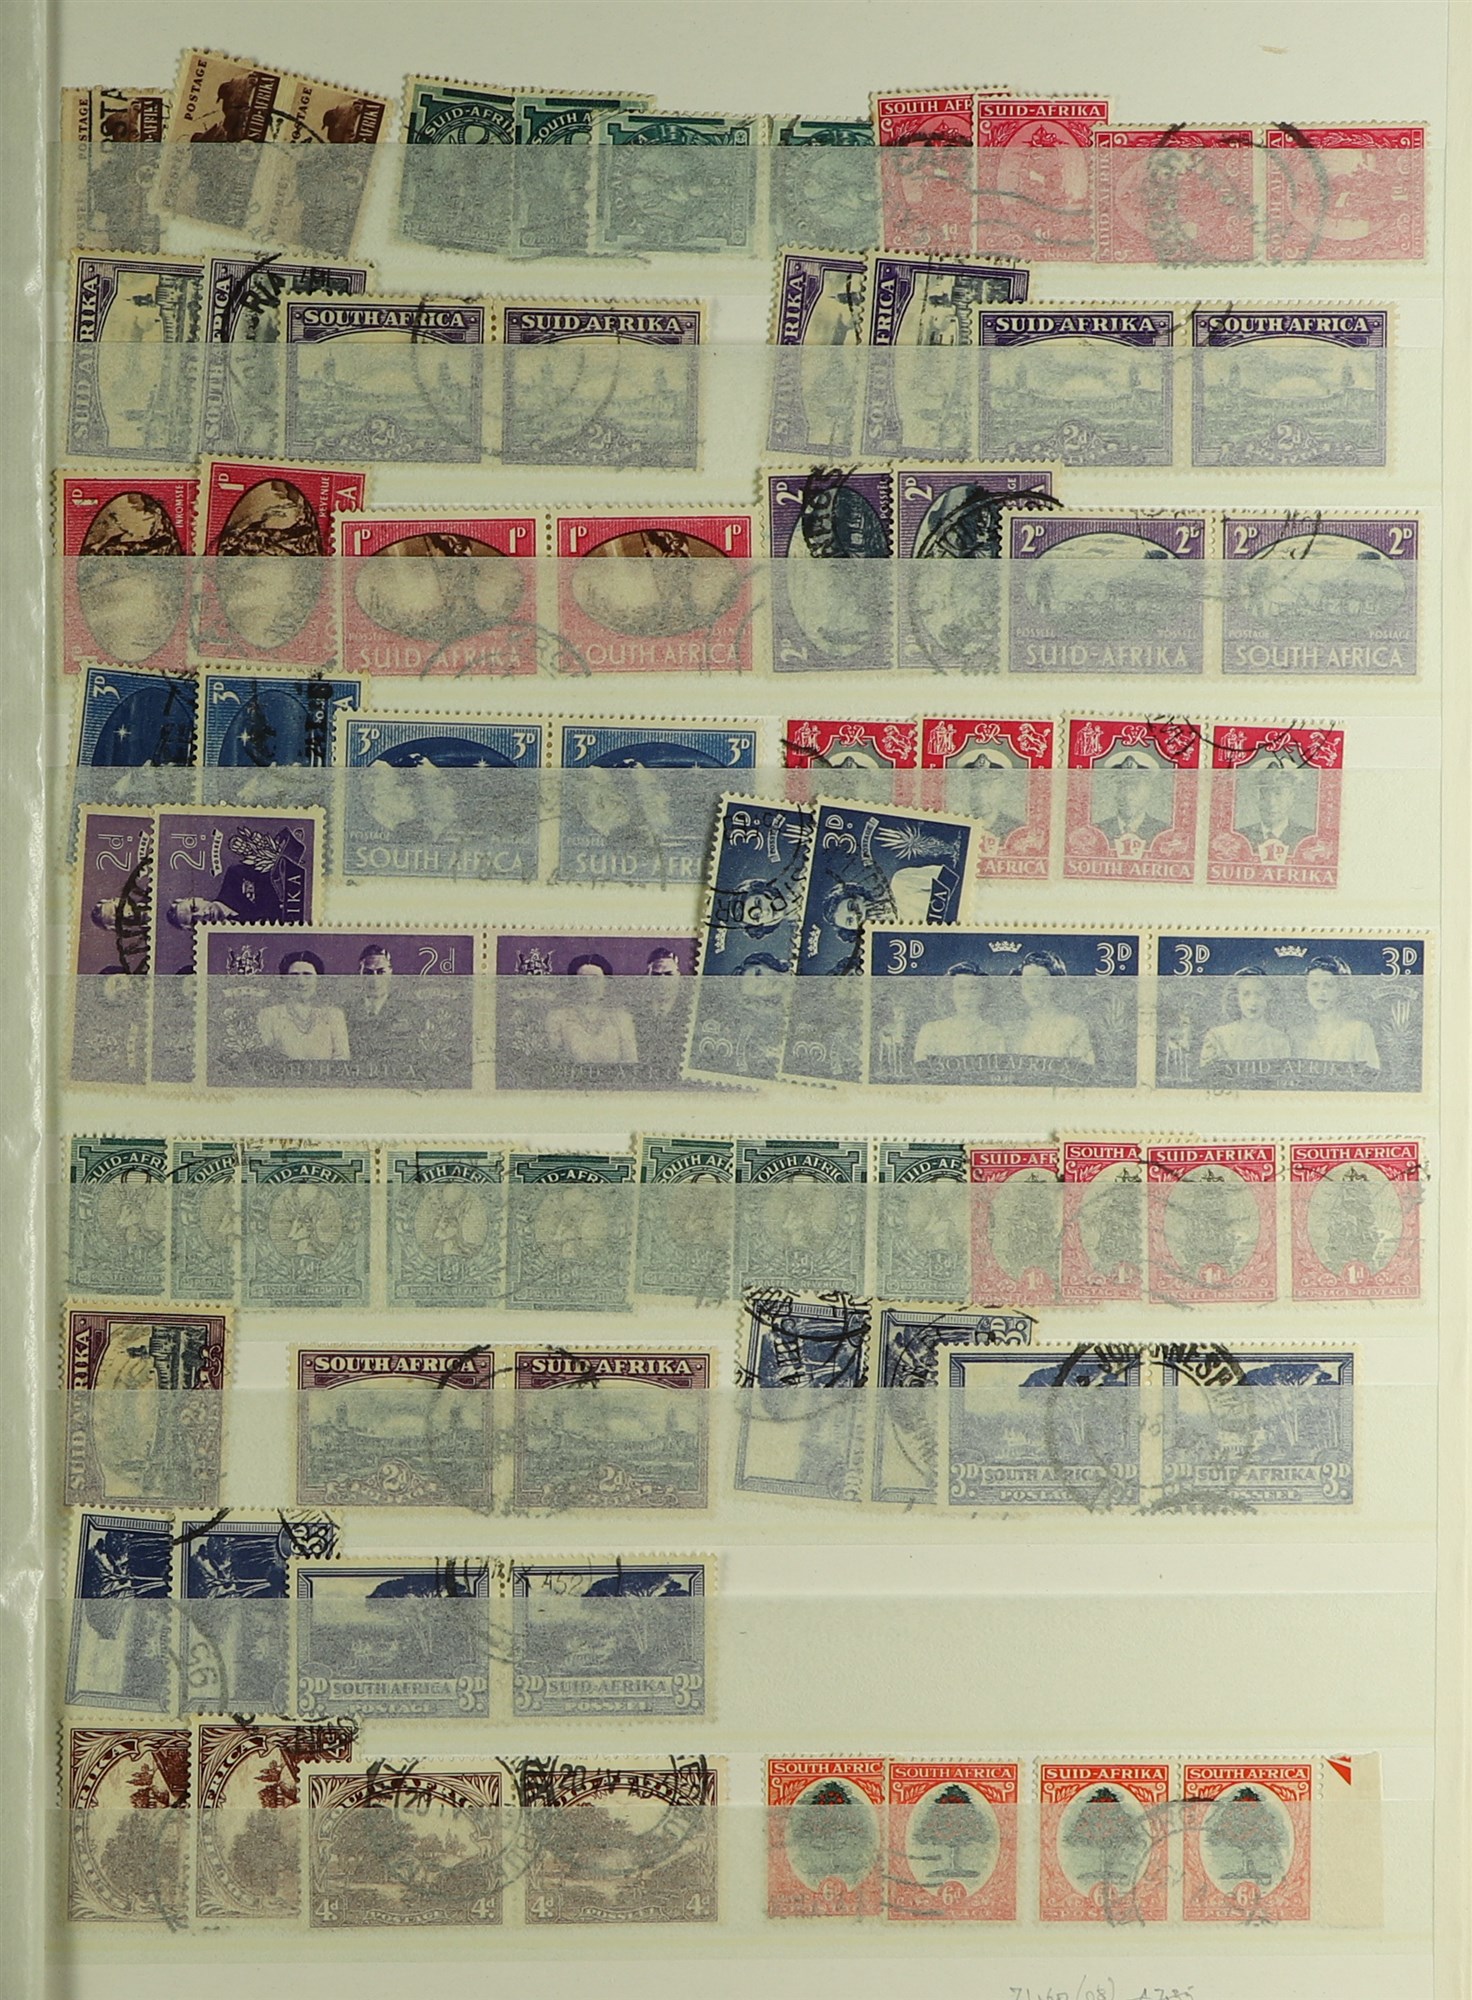 SOUTH AFRICA 1913 - 2000 COLLECTION / ACCUMULATION of 1500+ mint / never hinged mint & used stamps - Image 7 of 15